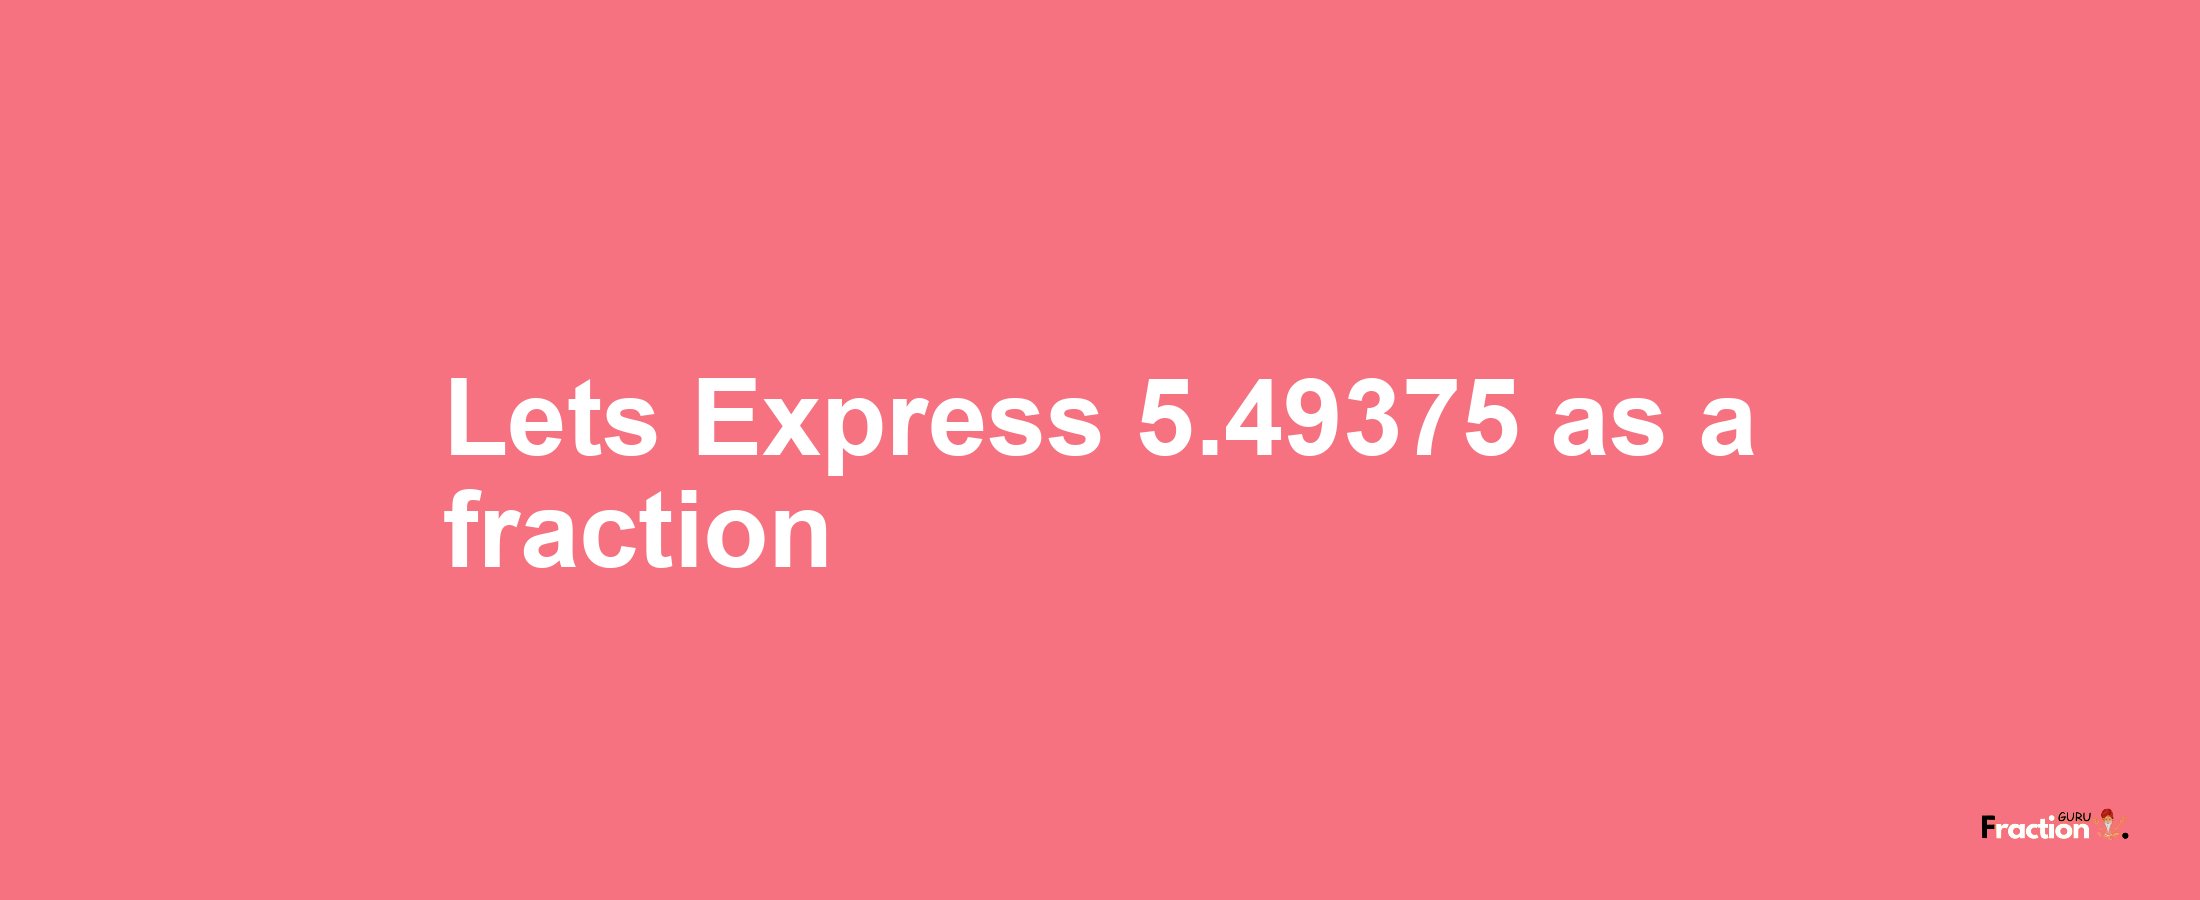 Lets Express 5.49375 as afraction